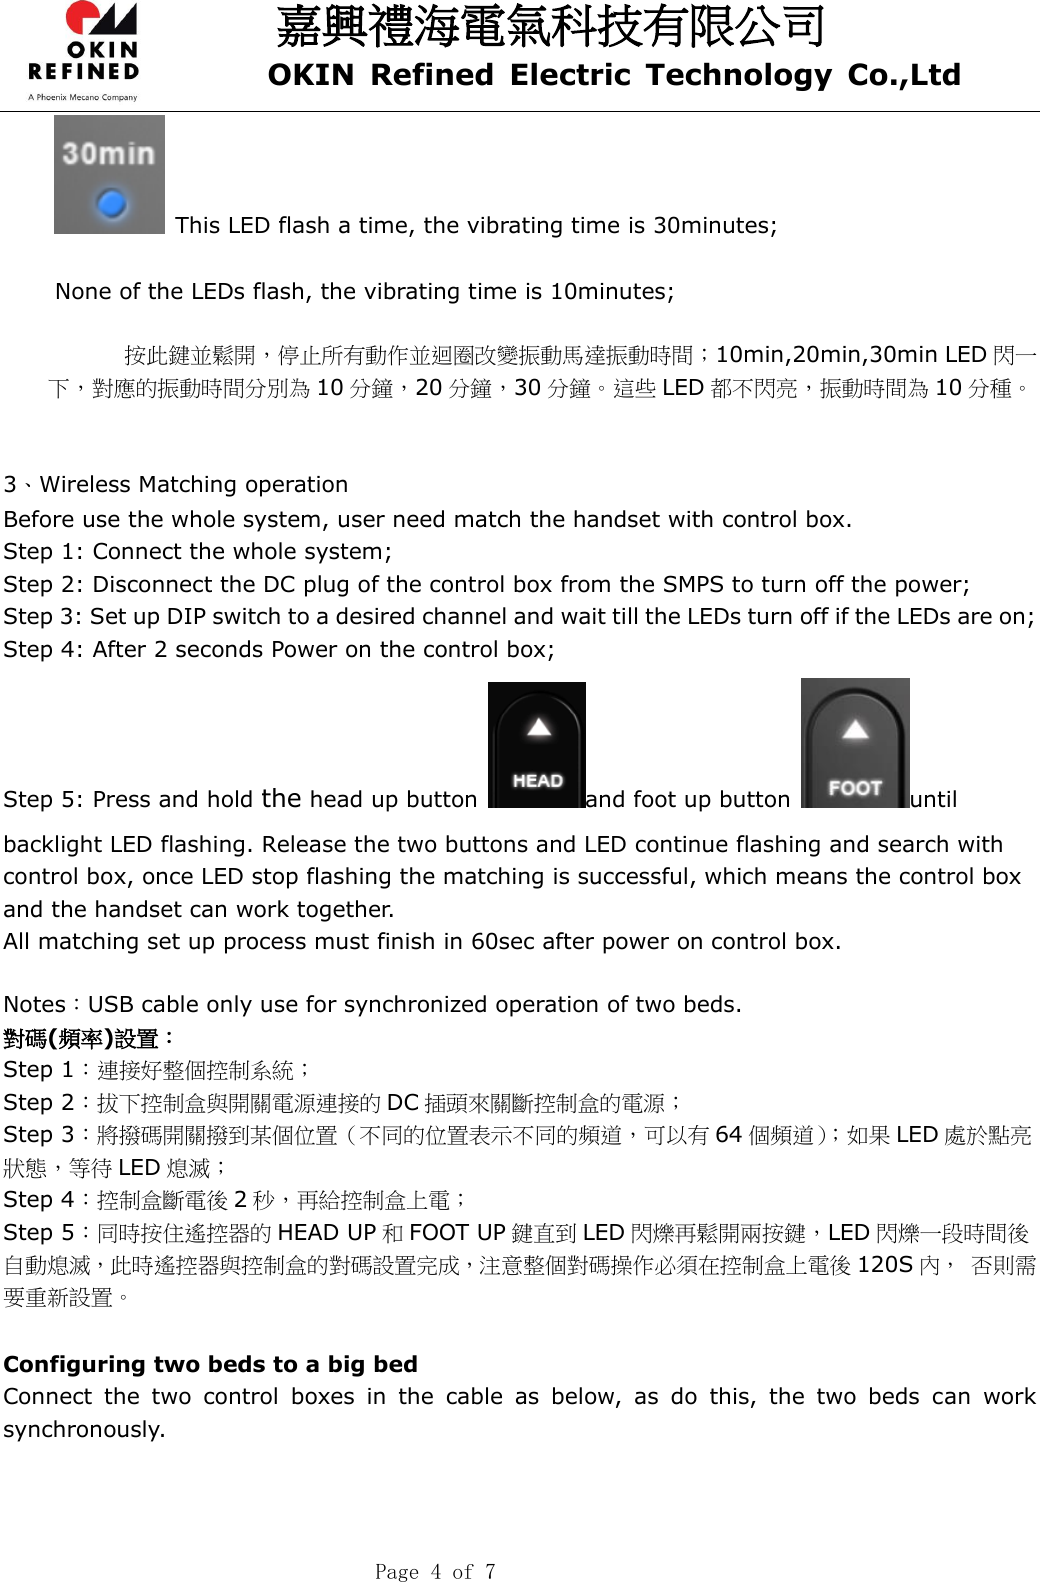 嘉興禮海電氣科技有限公司 OKIN  Refined  Electric  Technology  Co.,Ltd    Page 4 of 7   This LED flash a time, the vibrating time is 30minutes;  None of the LEDs flash, the vibrating time is 10minutes;  按此鍵並鬆開，停止所有動作並迴圈改變振動馬達振動時間；10min,20min,30min LED 閃一下，對應的振動時間分別為 10 分鐘，20 分鐘，30 分鐘。這些 LED 都不閃亮，振動時間為 10 分種。   3、Wireless Matching operation Before use the whole system, user need match the handset with control box. Step 1: Connect the whole system; Step 2: Disconnect the DC plug of the control box from the SMPS to turn off the power; Step 3: Set up DIP switch to a desired channel and wait till the LEDs turn off if the LEDs are on; Step 4: After 2 seconds Power on the control box; Step 5: Press and hold the head up button  and foot up button  until backlight LED flashing. Release the two buttons and LED continue flashing and search with control box, once LED stop flashing the matching is successful, which means the control box and the handset can work together. All matching set up process must finish in 60sec after power on control box.  Notes：USB cable only use for synchronized operation of two beds. 對碼(頻率)設置： Step 1：連接好整個控制系統； Step 2：拔下控制盒與開關電源連接的 DC 插頭來關斷控制盒的電源； Step 3：將撥碼開關撥到某個位置（不同的位置表示不同的頻道，可以有 64 個頻道）；如果 LED 處於點亮狀態，等待 LED 熄滅； Step 4：控制盒斷電後 2秒，再給控制盒上電； Step 5：同時按住遙控器的 HEAD UP 和FOOT UP 鍵直到 LED 閃爍再鬆開兩按鍵，LED 閃爍一段時間後自動熄滅，此時遙控器與控制盒的對碼設置完成，注意整個對碼操作必須在控制盒上電後 120S 內， 否則需要重新設置。  Configuring two beds to a big bed Connect  the  two  control  boxes  in  the  cable  as  below,  as  do  this,  the  two  beds  can  work     synchronously. 